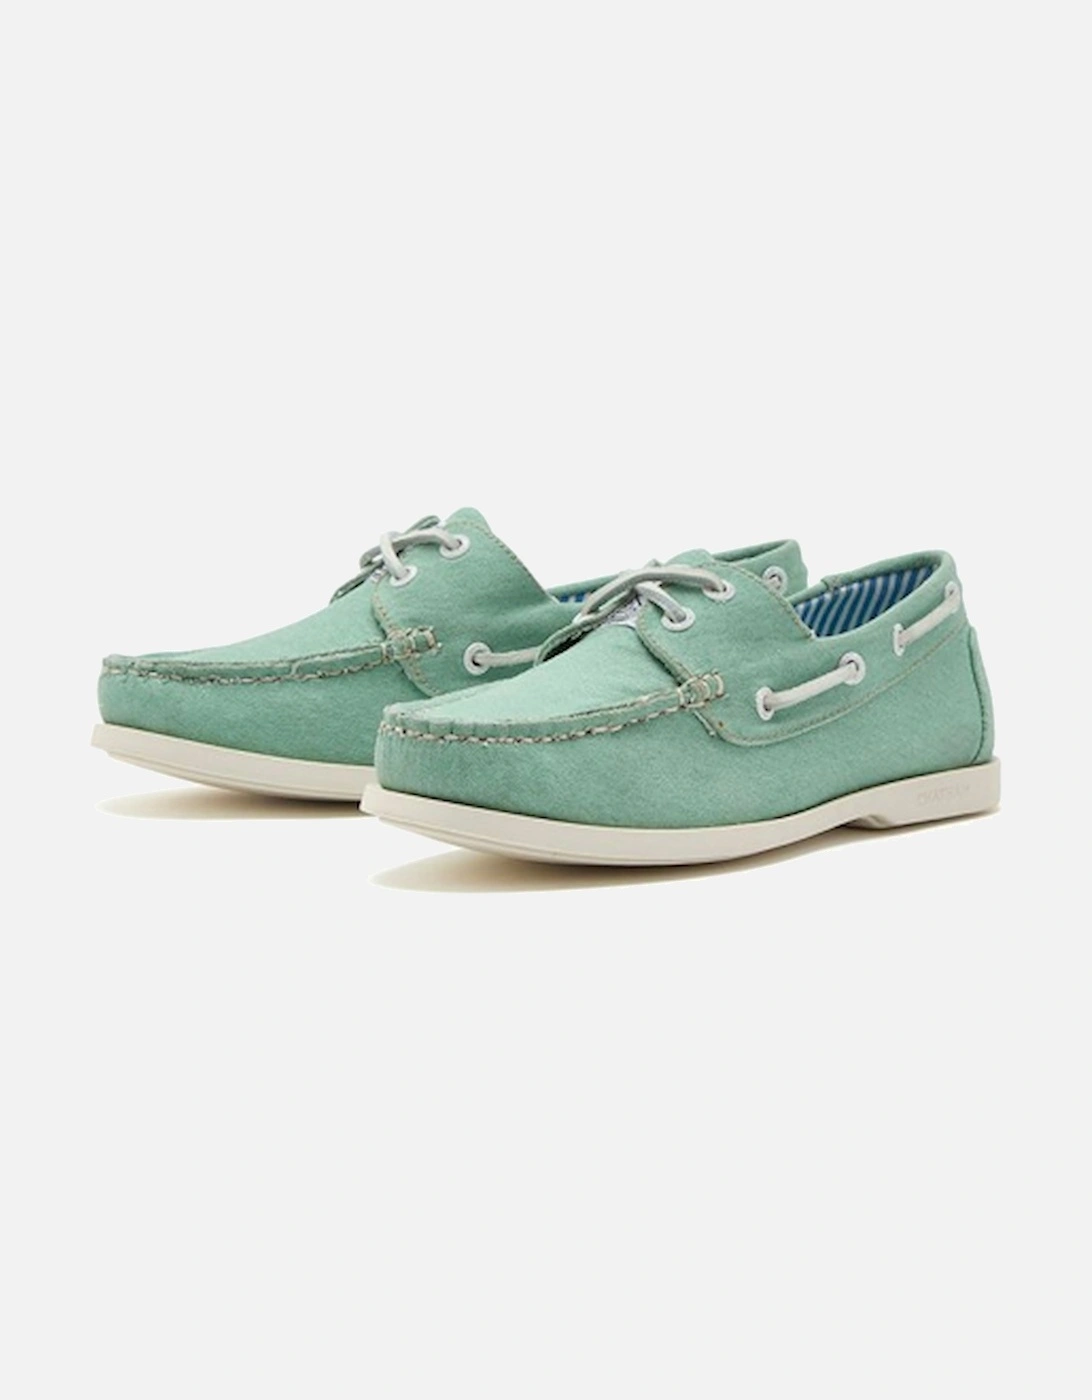 X Joules Women's Jetty Lady Canvas Boat Shoes Green